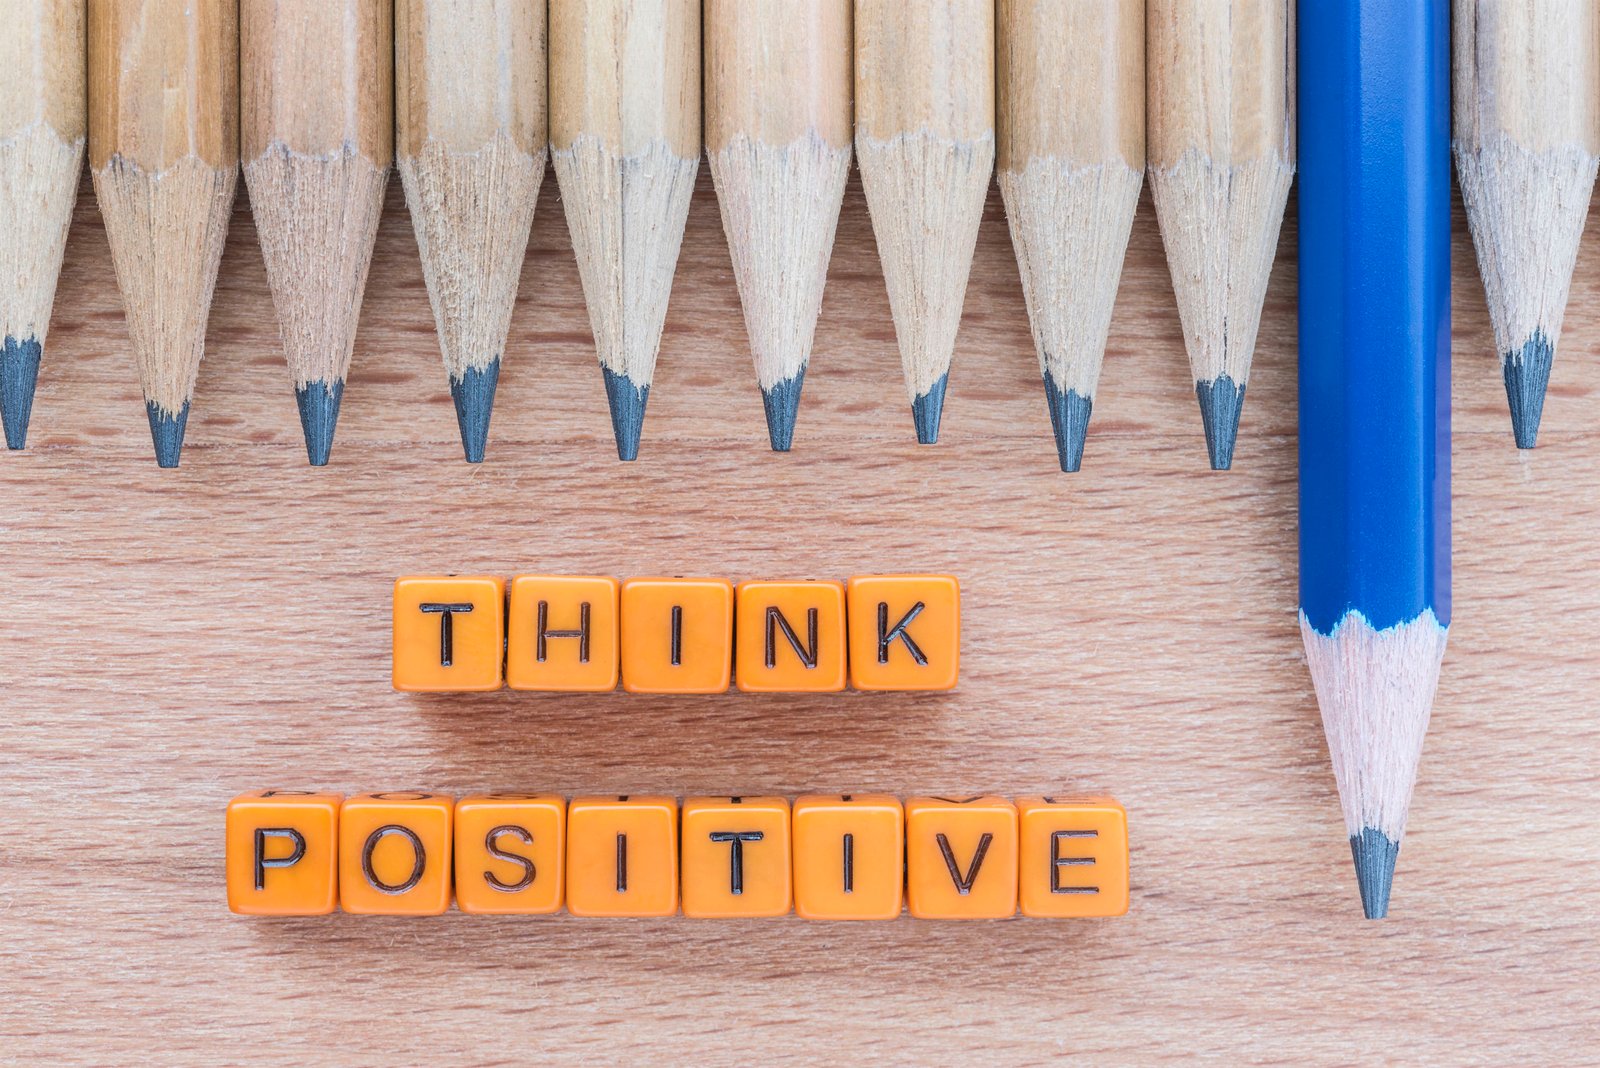 Positive Thinking: Benefits, Definition and How to Practice